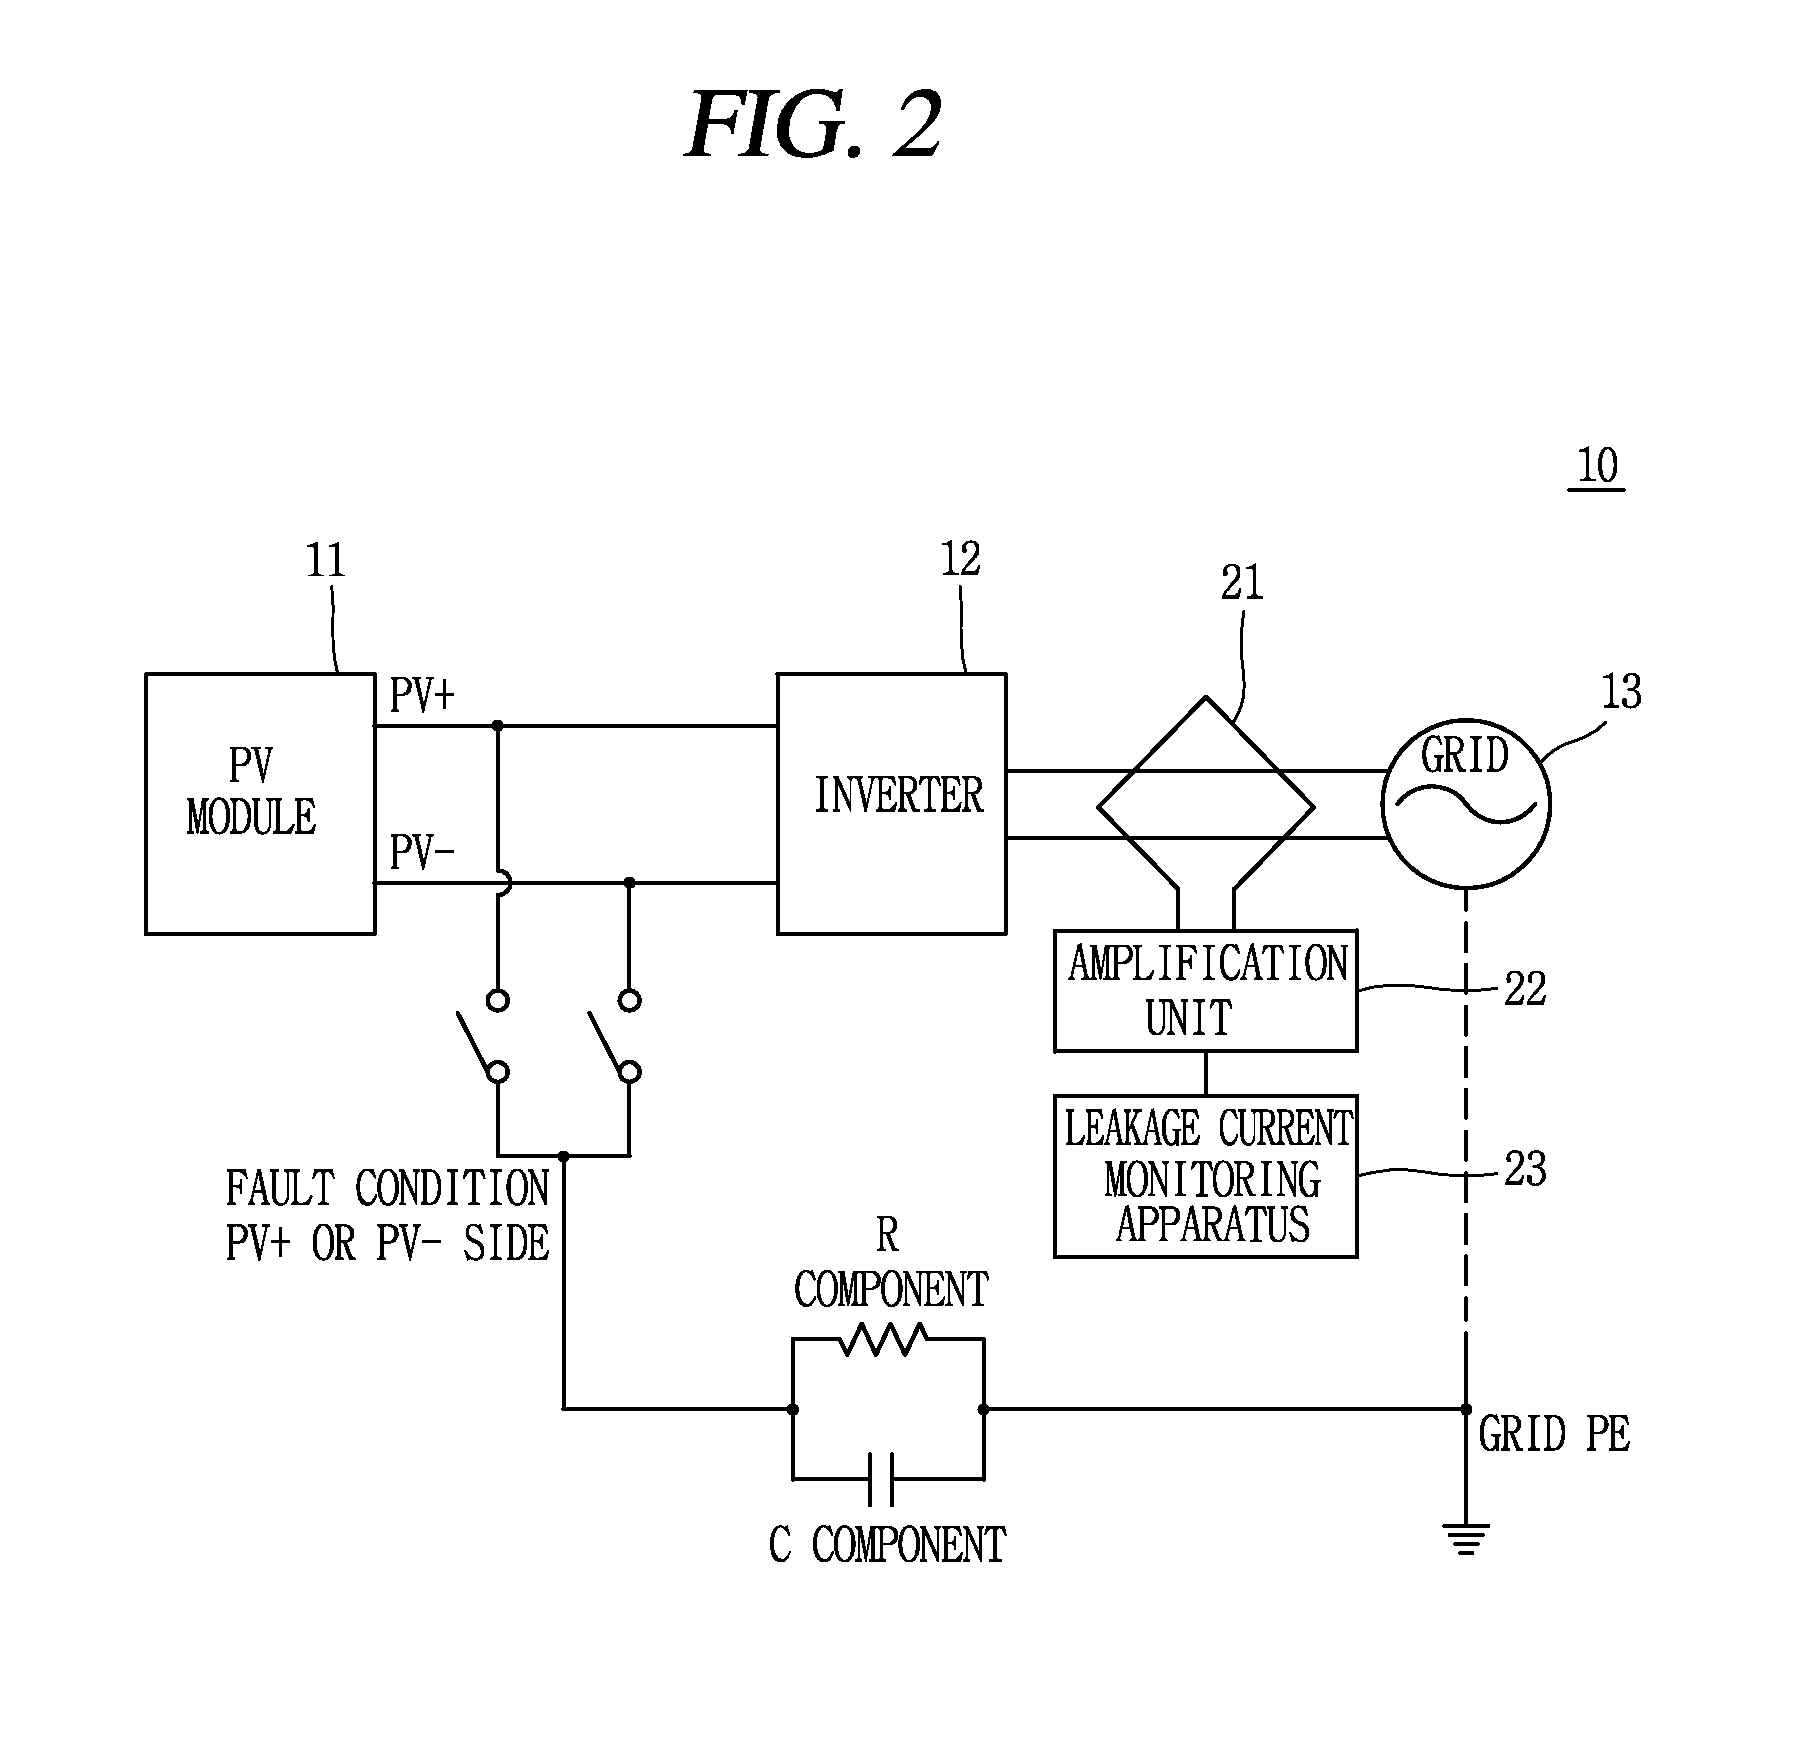 Apparatus for monitoring leakage current of transformer-less photovoltaic inverter